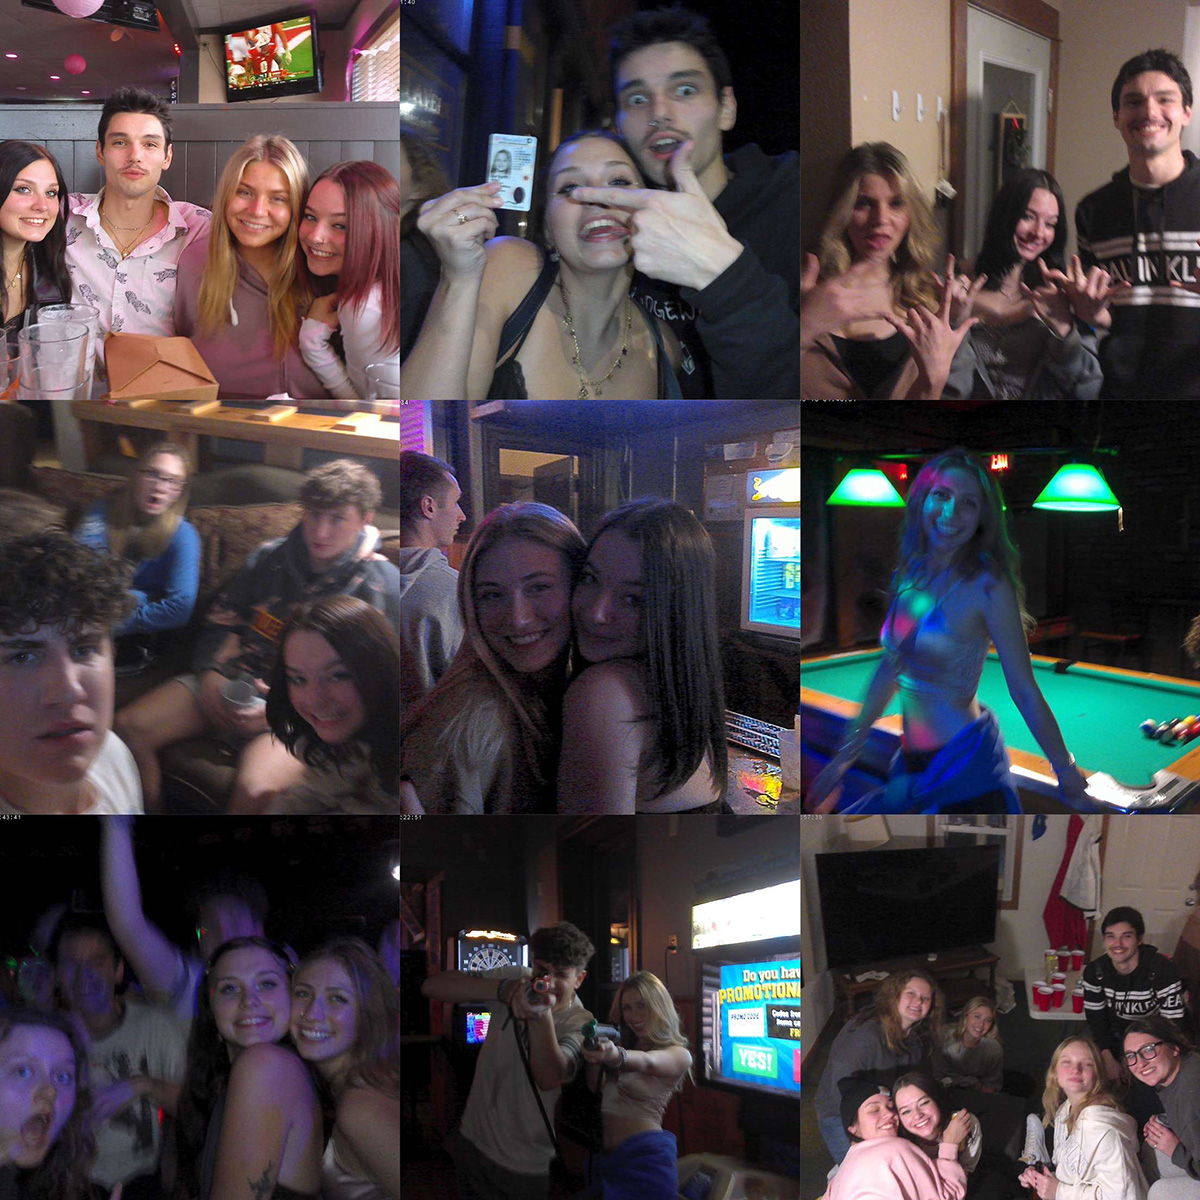 Photos+taken+of+my+friends+and+me.